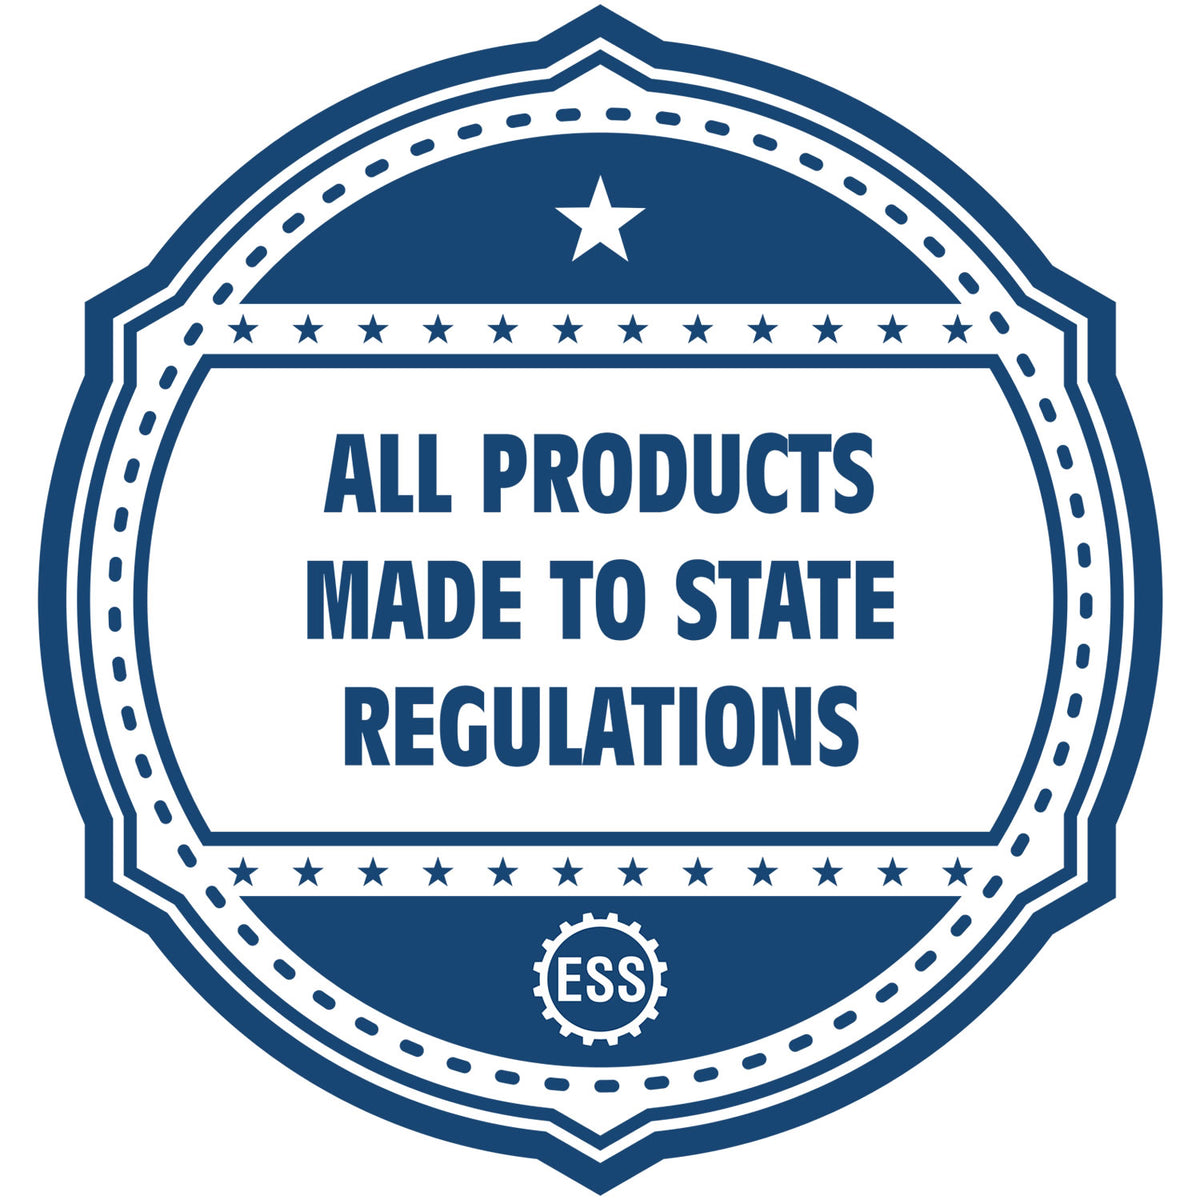 A blue icon or badge for the Hybrid Illinois Architect Seal showing that this product is made in compliance with state regulations.